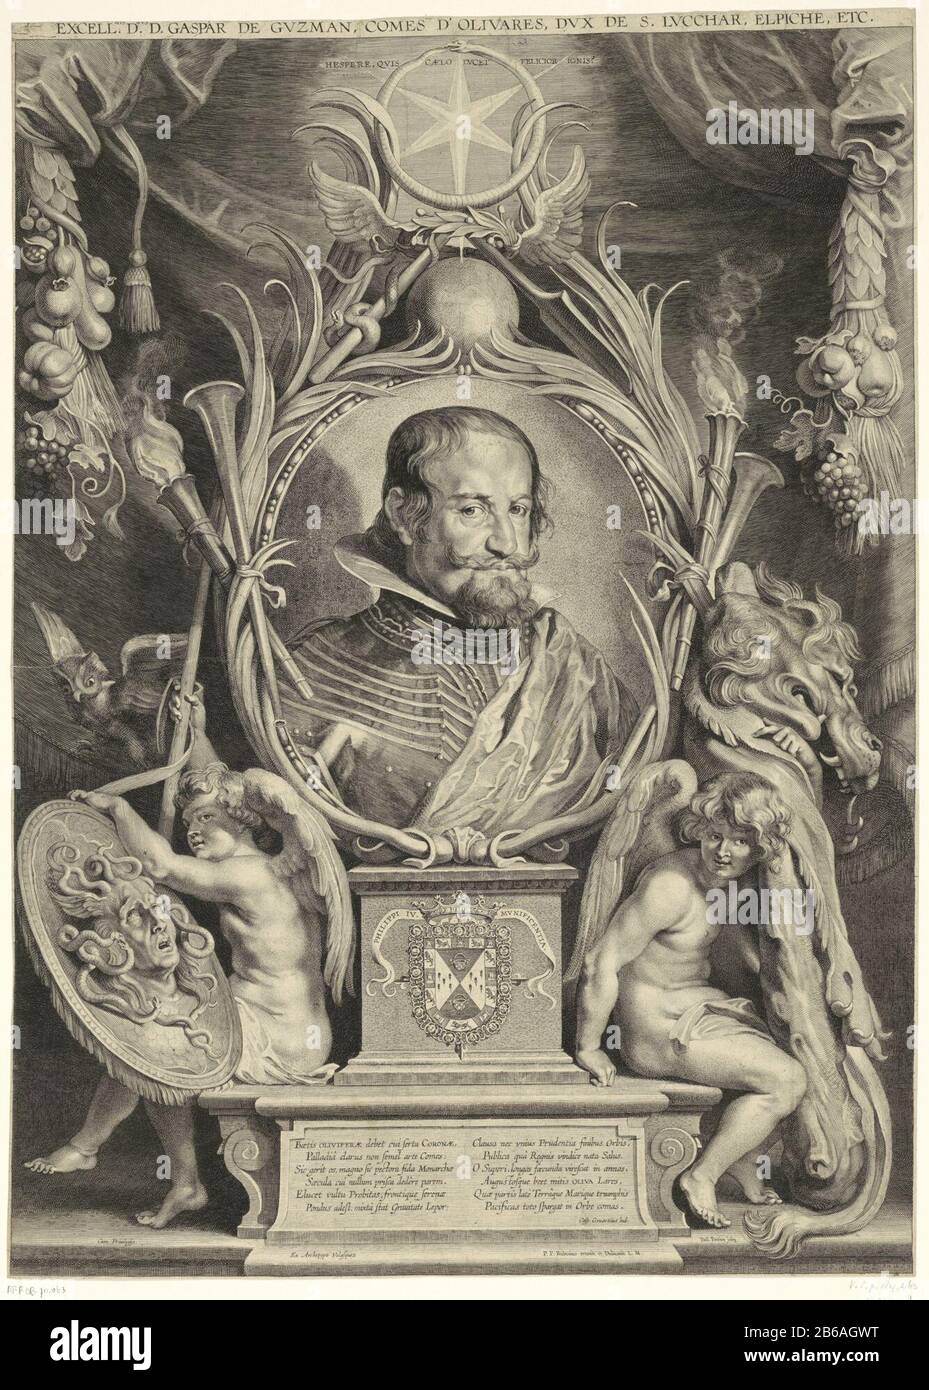 Portrait of Gaspard de Gusman, Count of Olivares and Duke of San Lucar, mounted in a frame that has been awarded the eternity symbol ouroboros (the snake that bites its own tail). On the pedestal his arms and twaalfregelig poem, in two columns, in Latin. On each side are angels with the attributes of Minerva (left) and Hercules (right). The picture has an epigraph in Latijn. Manufacturer : printmaker, Paul Pontius (listed building), designed by Peter Paul Rubens (listed building), designed by Diego Rodriguez de Silva y Velázquez (listed property) writer: Casper Gevartius (listed property) prov Stock Photo